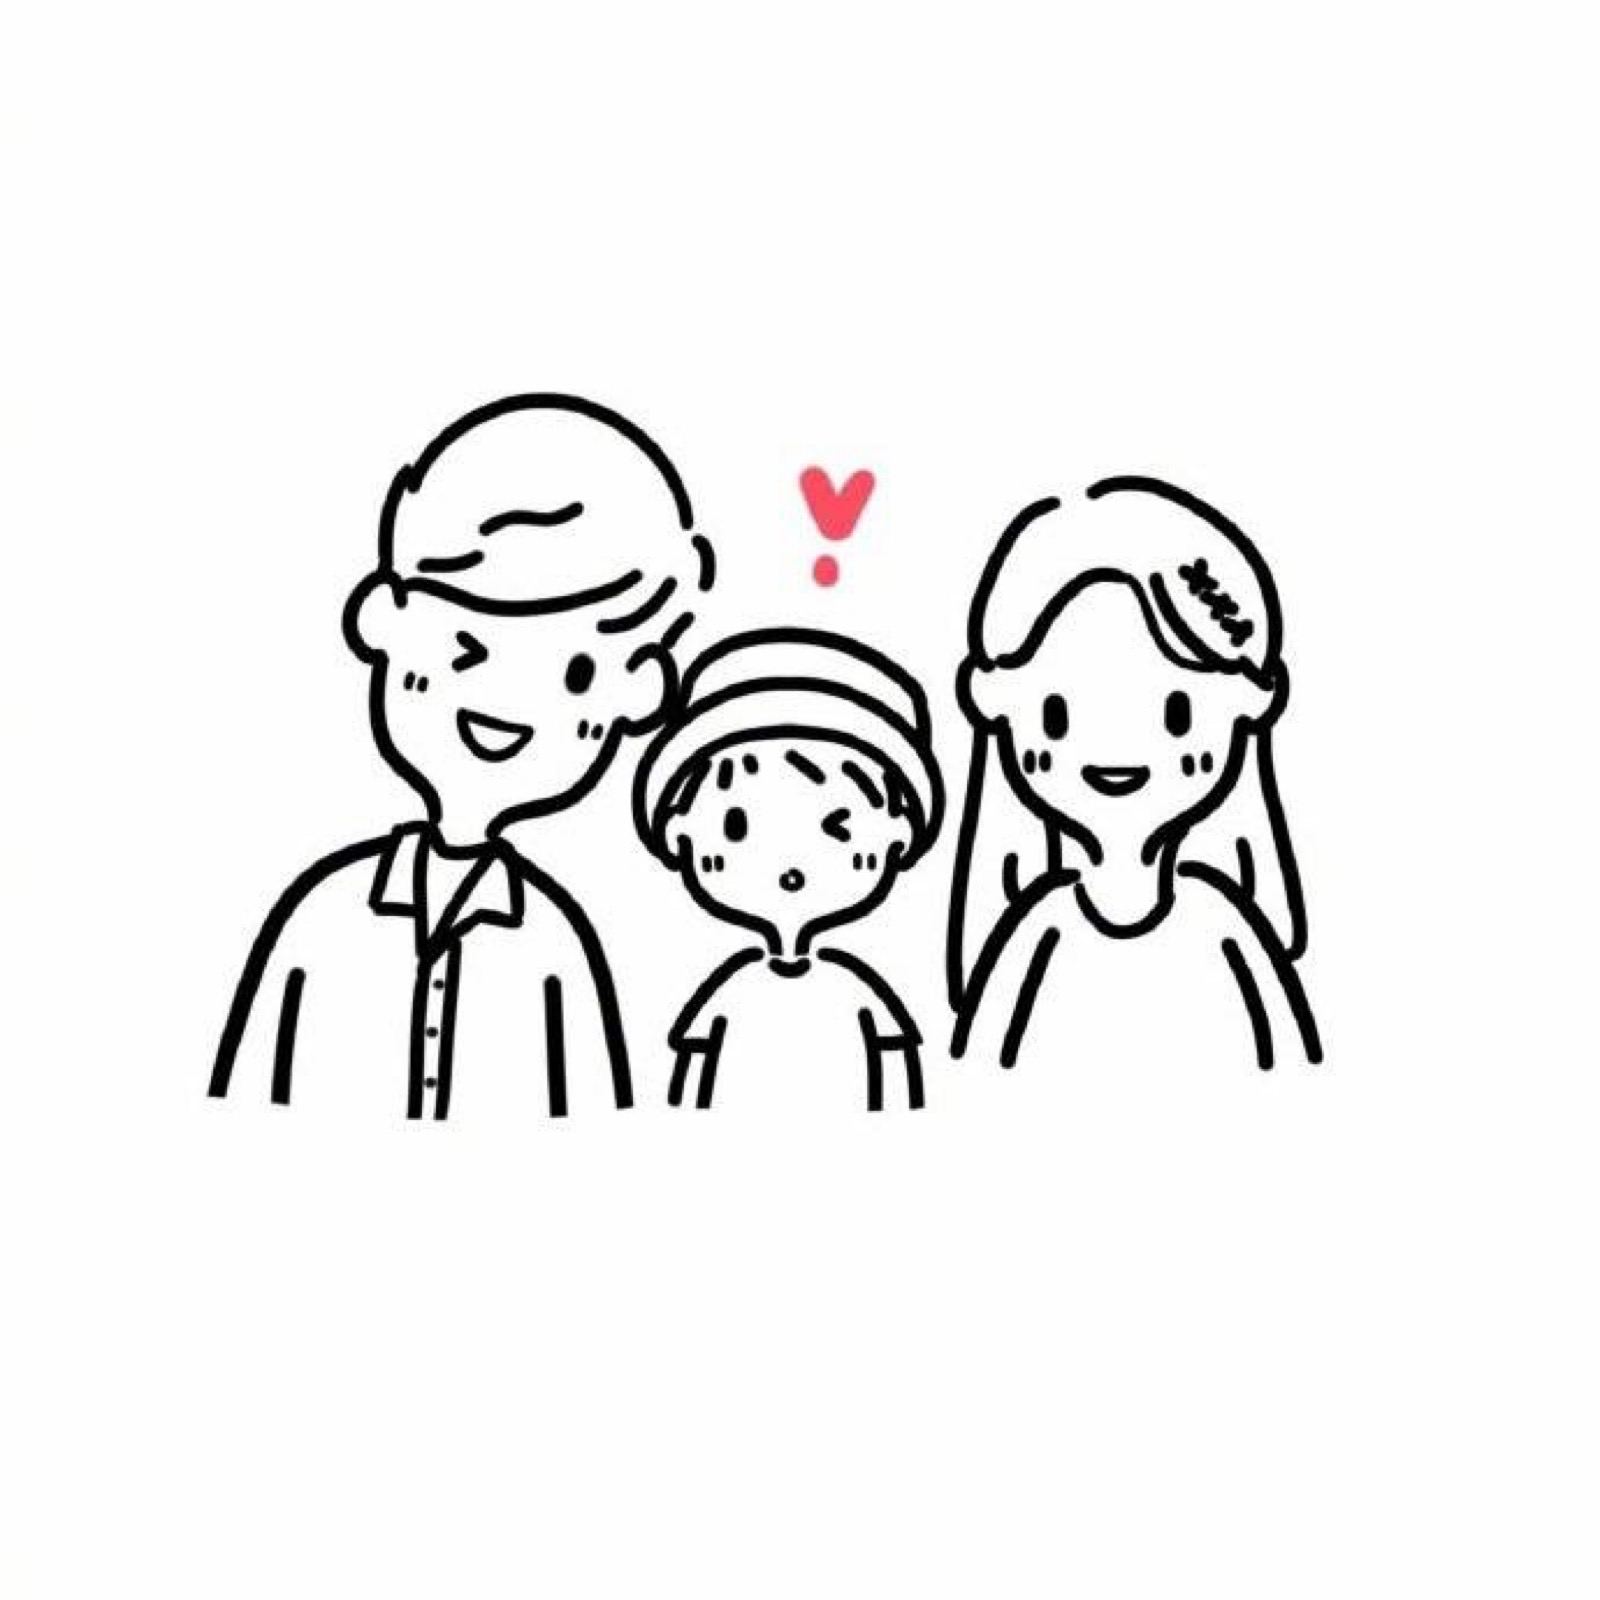 Father Silhouette Family - A family of three family silhouette figures ...